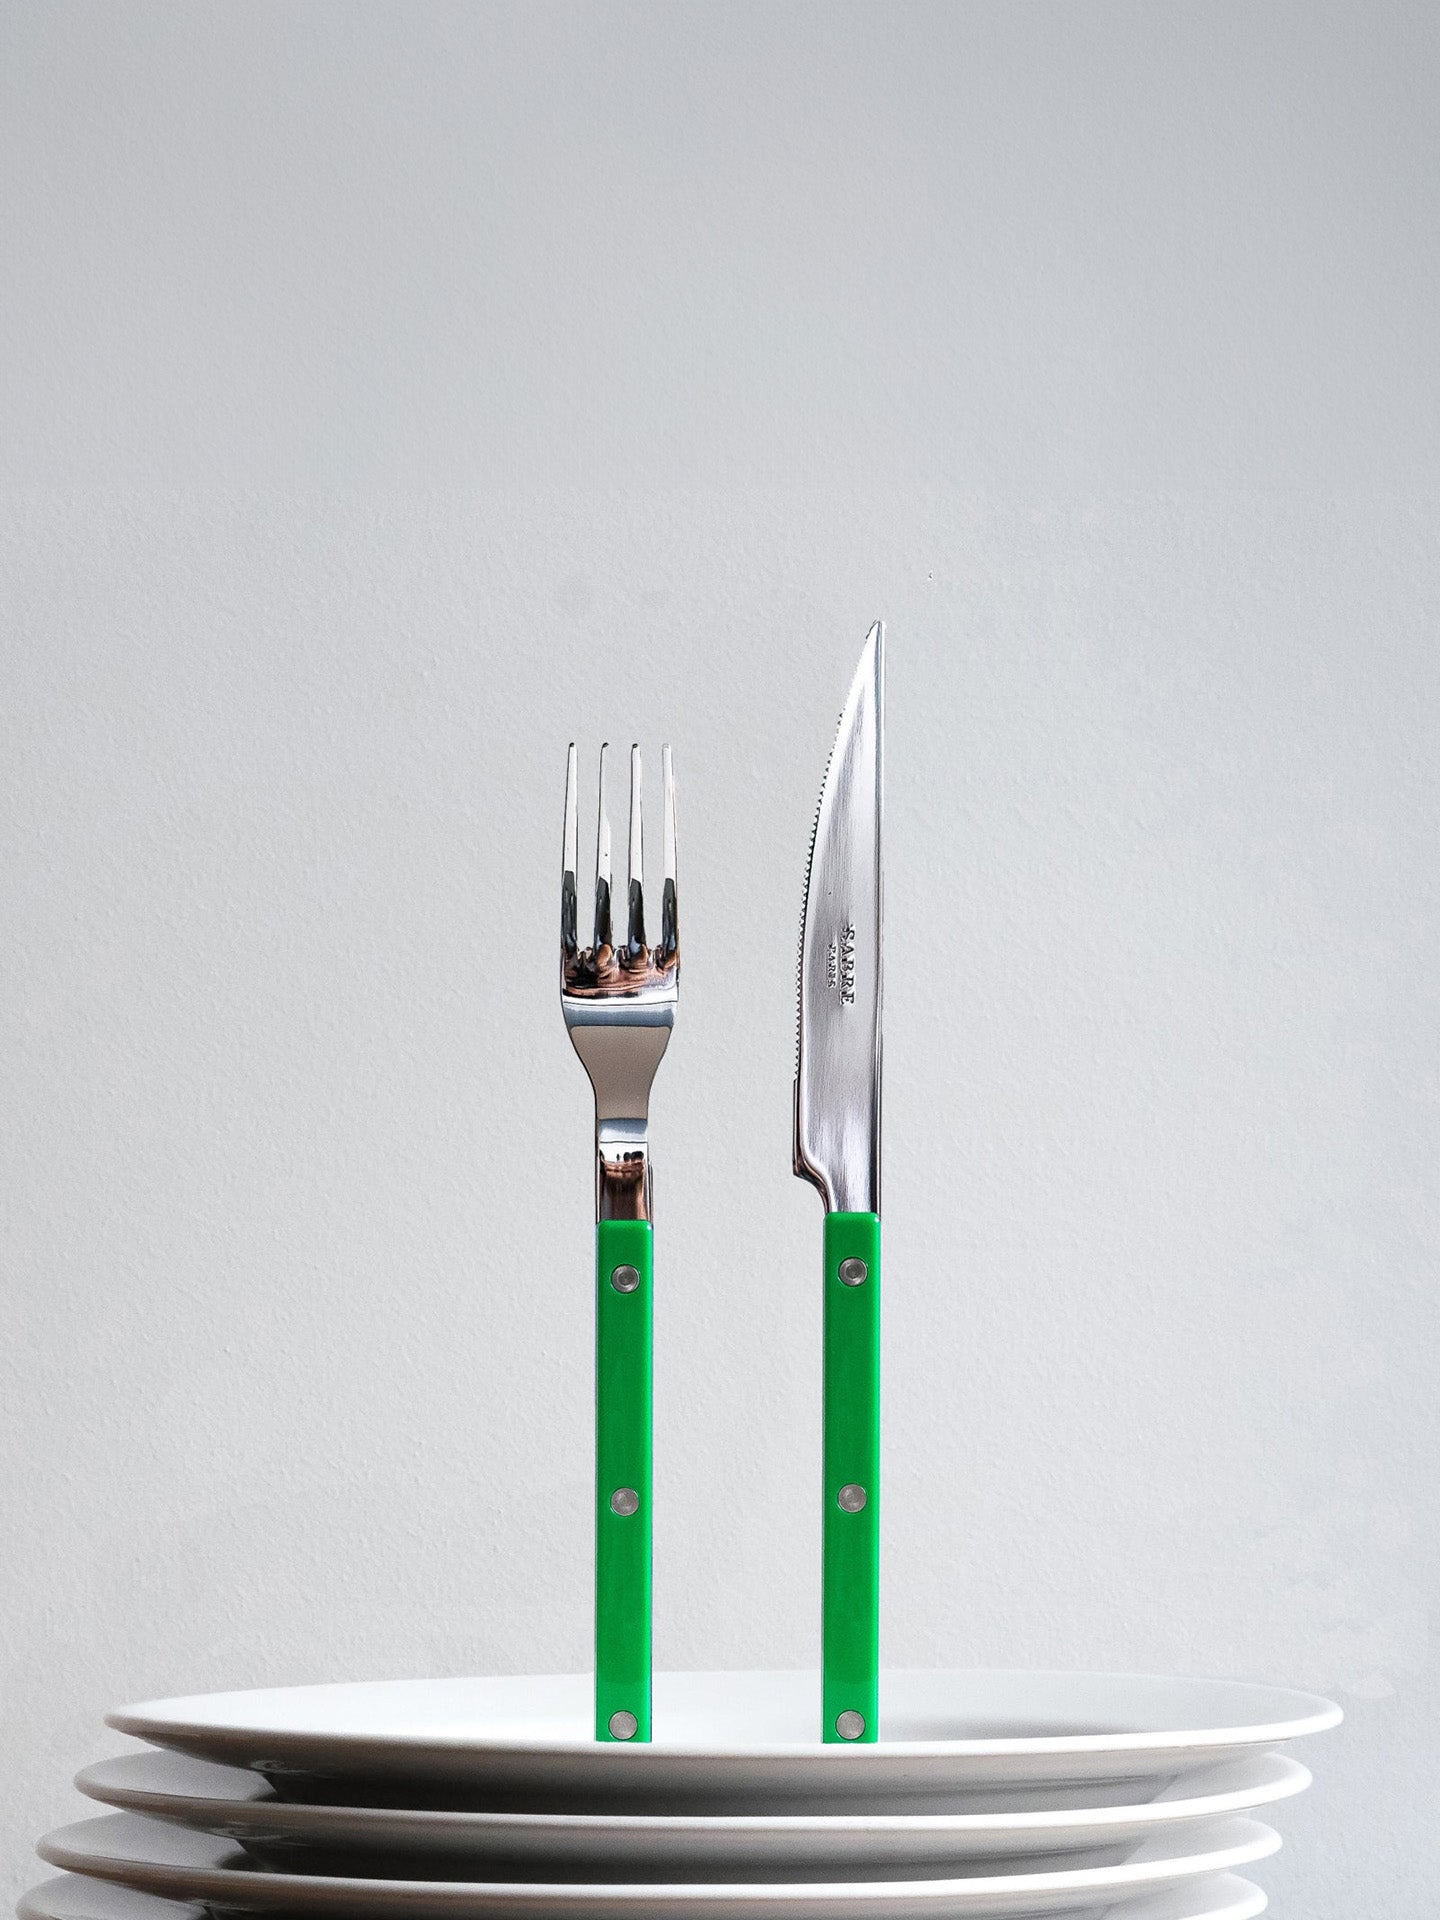 The acrylic handle is decorated with stainless steel rivets. The Bistro garden green dinner forks and knives are easy to clean in a dishwasher.